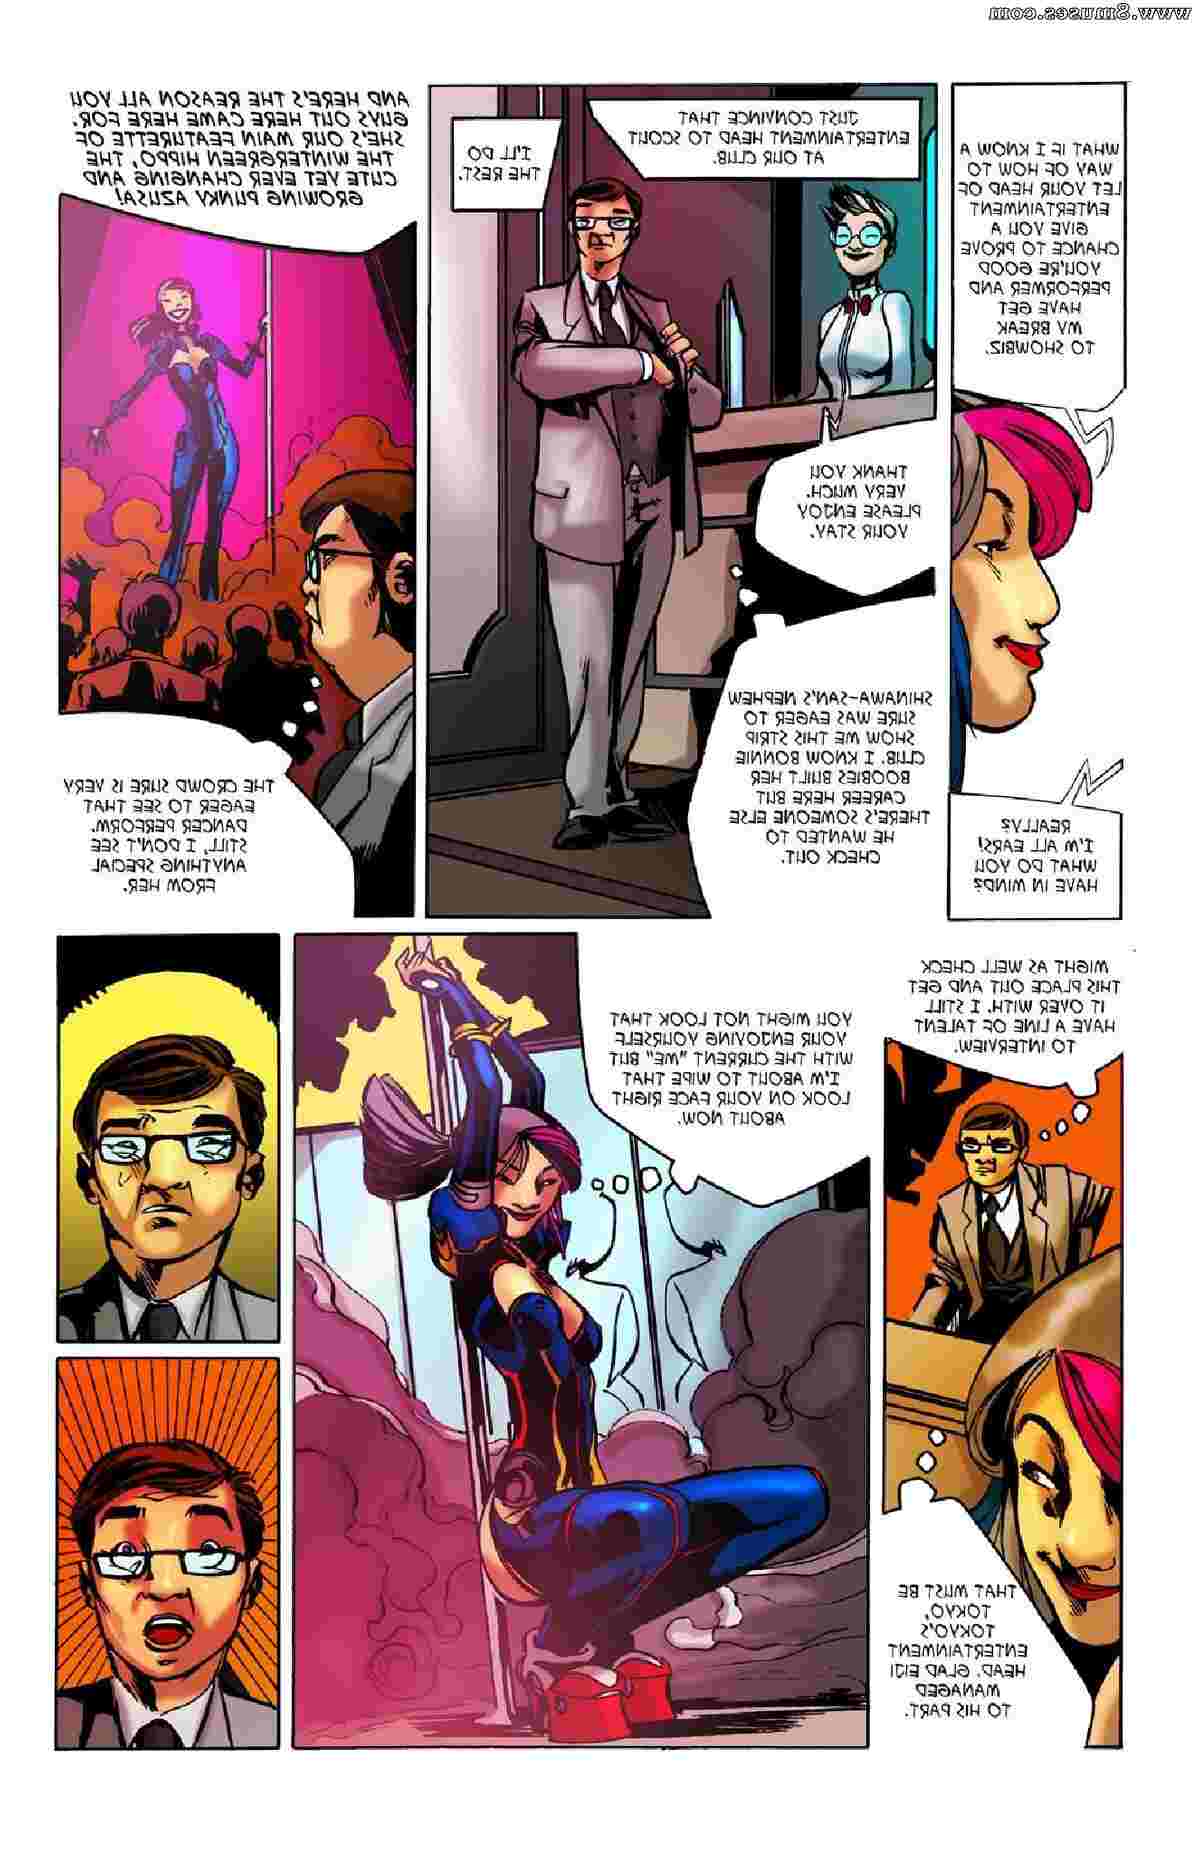 BE-Story-Club-Comics/Changing-and-Growing-in-Las-Vegas Changing_and_Growing_in_Las_Vegas__8muses_-_Sex_and_Porn_Comics_41.jpg